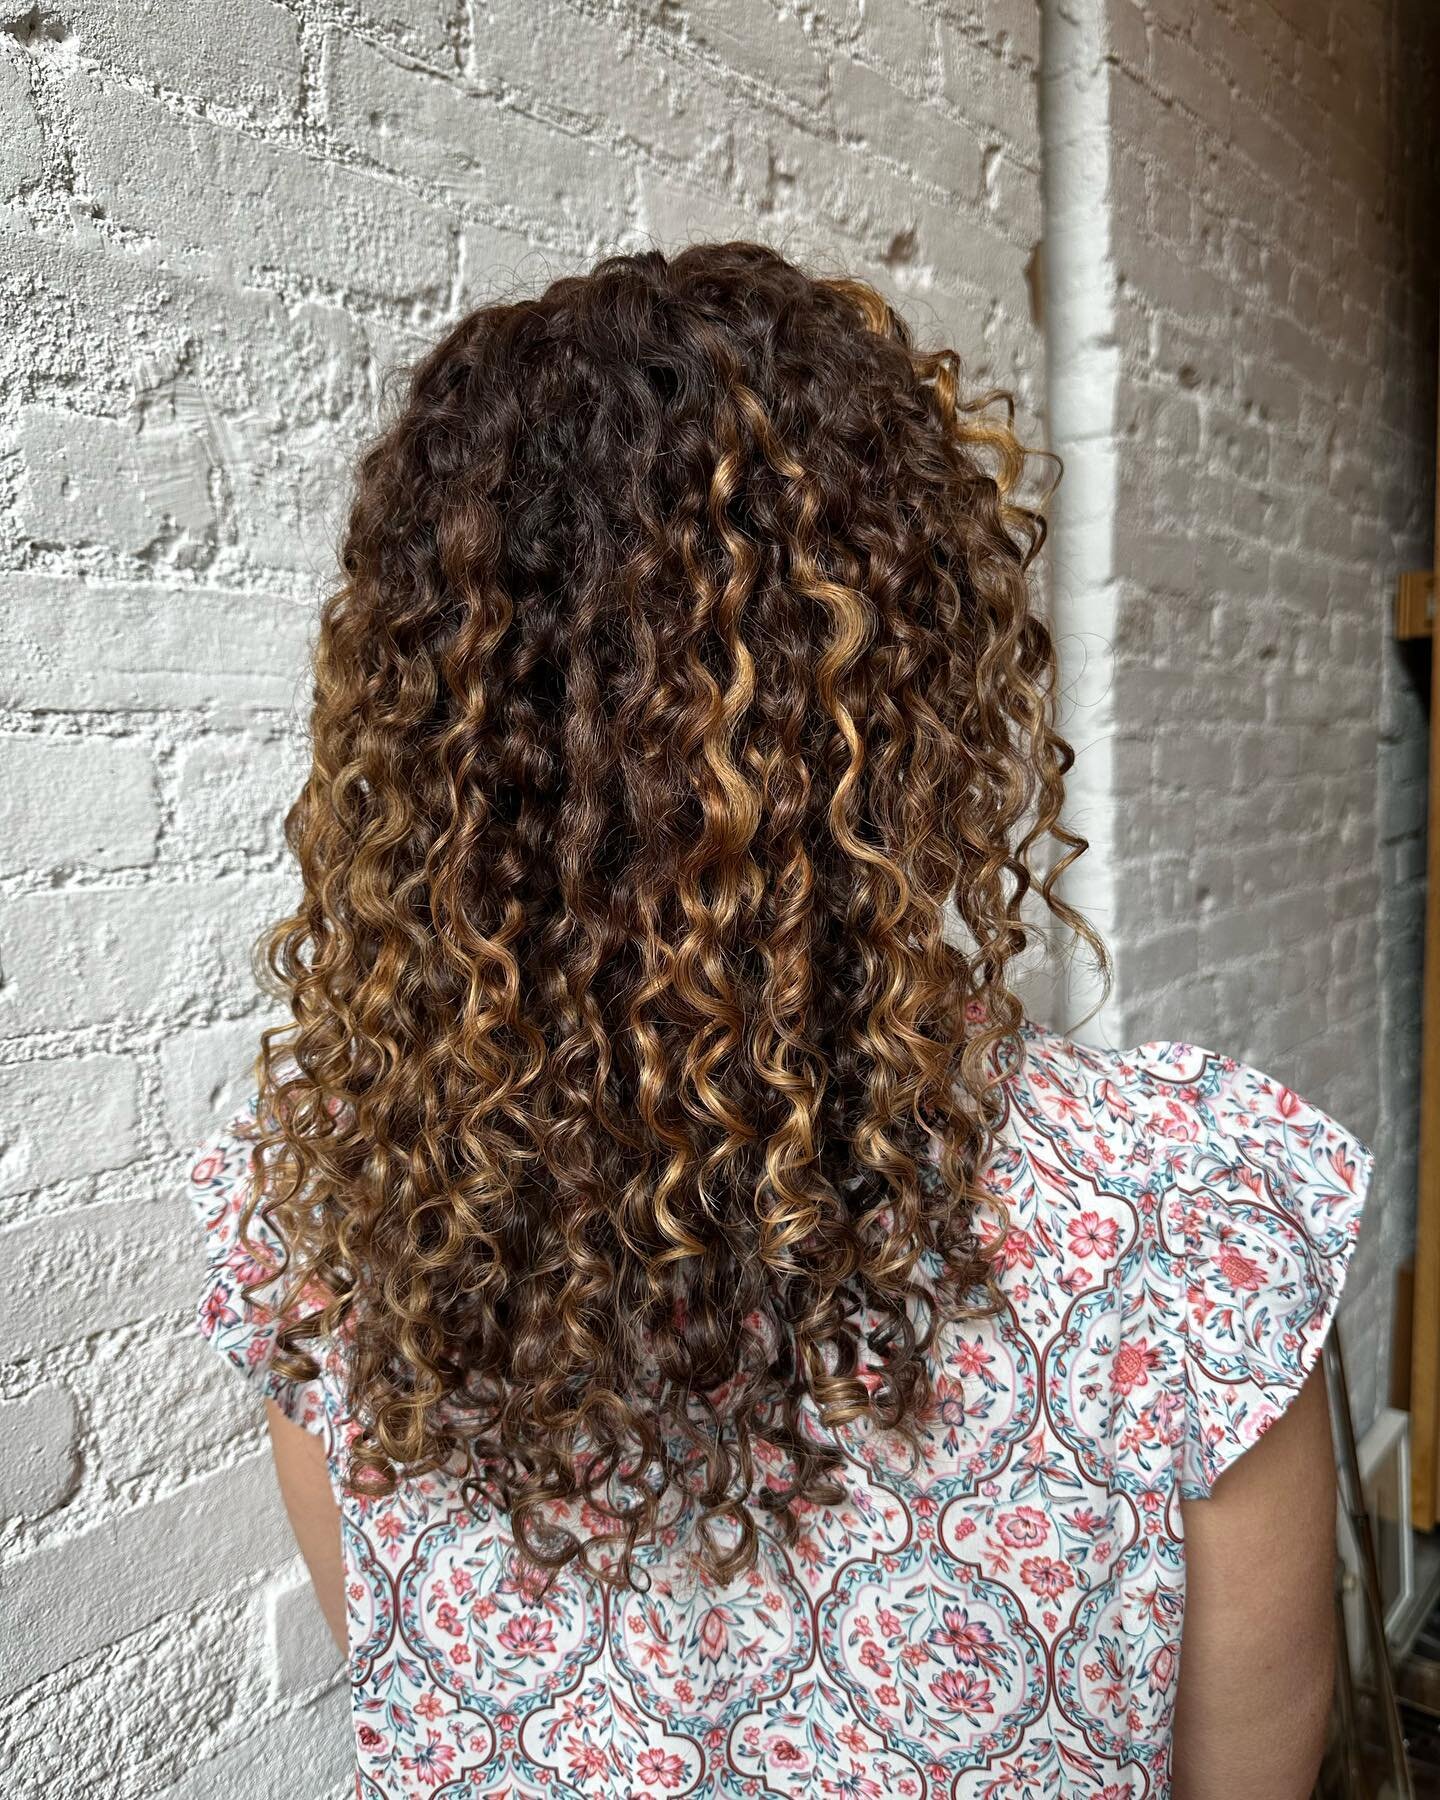 My second day model came from Pennsylvania with her sister. She had never the opportunity to experience Lorraine&rsquo;s products and her biggest concern was wanting to keep length, but knew it was time to freshen up her ends. I used a curl by curl c